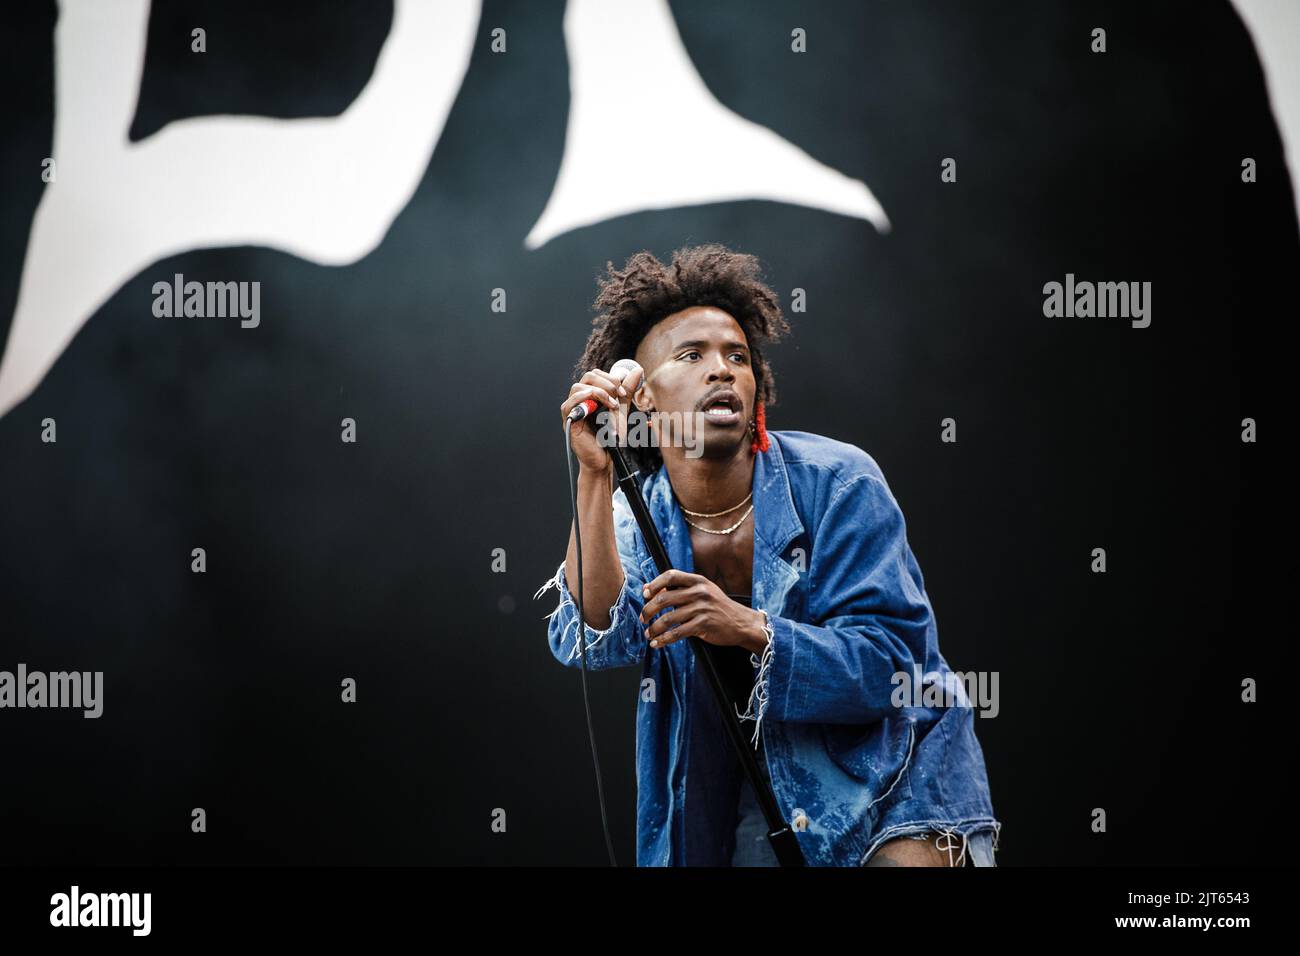 Leeds, UK. 28th Aug, 2022. DE'WAYNE perform live on stage at Leeds Festival, UK. Credit: Andy Gallagher/Alamy Live News Stock Photo